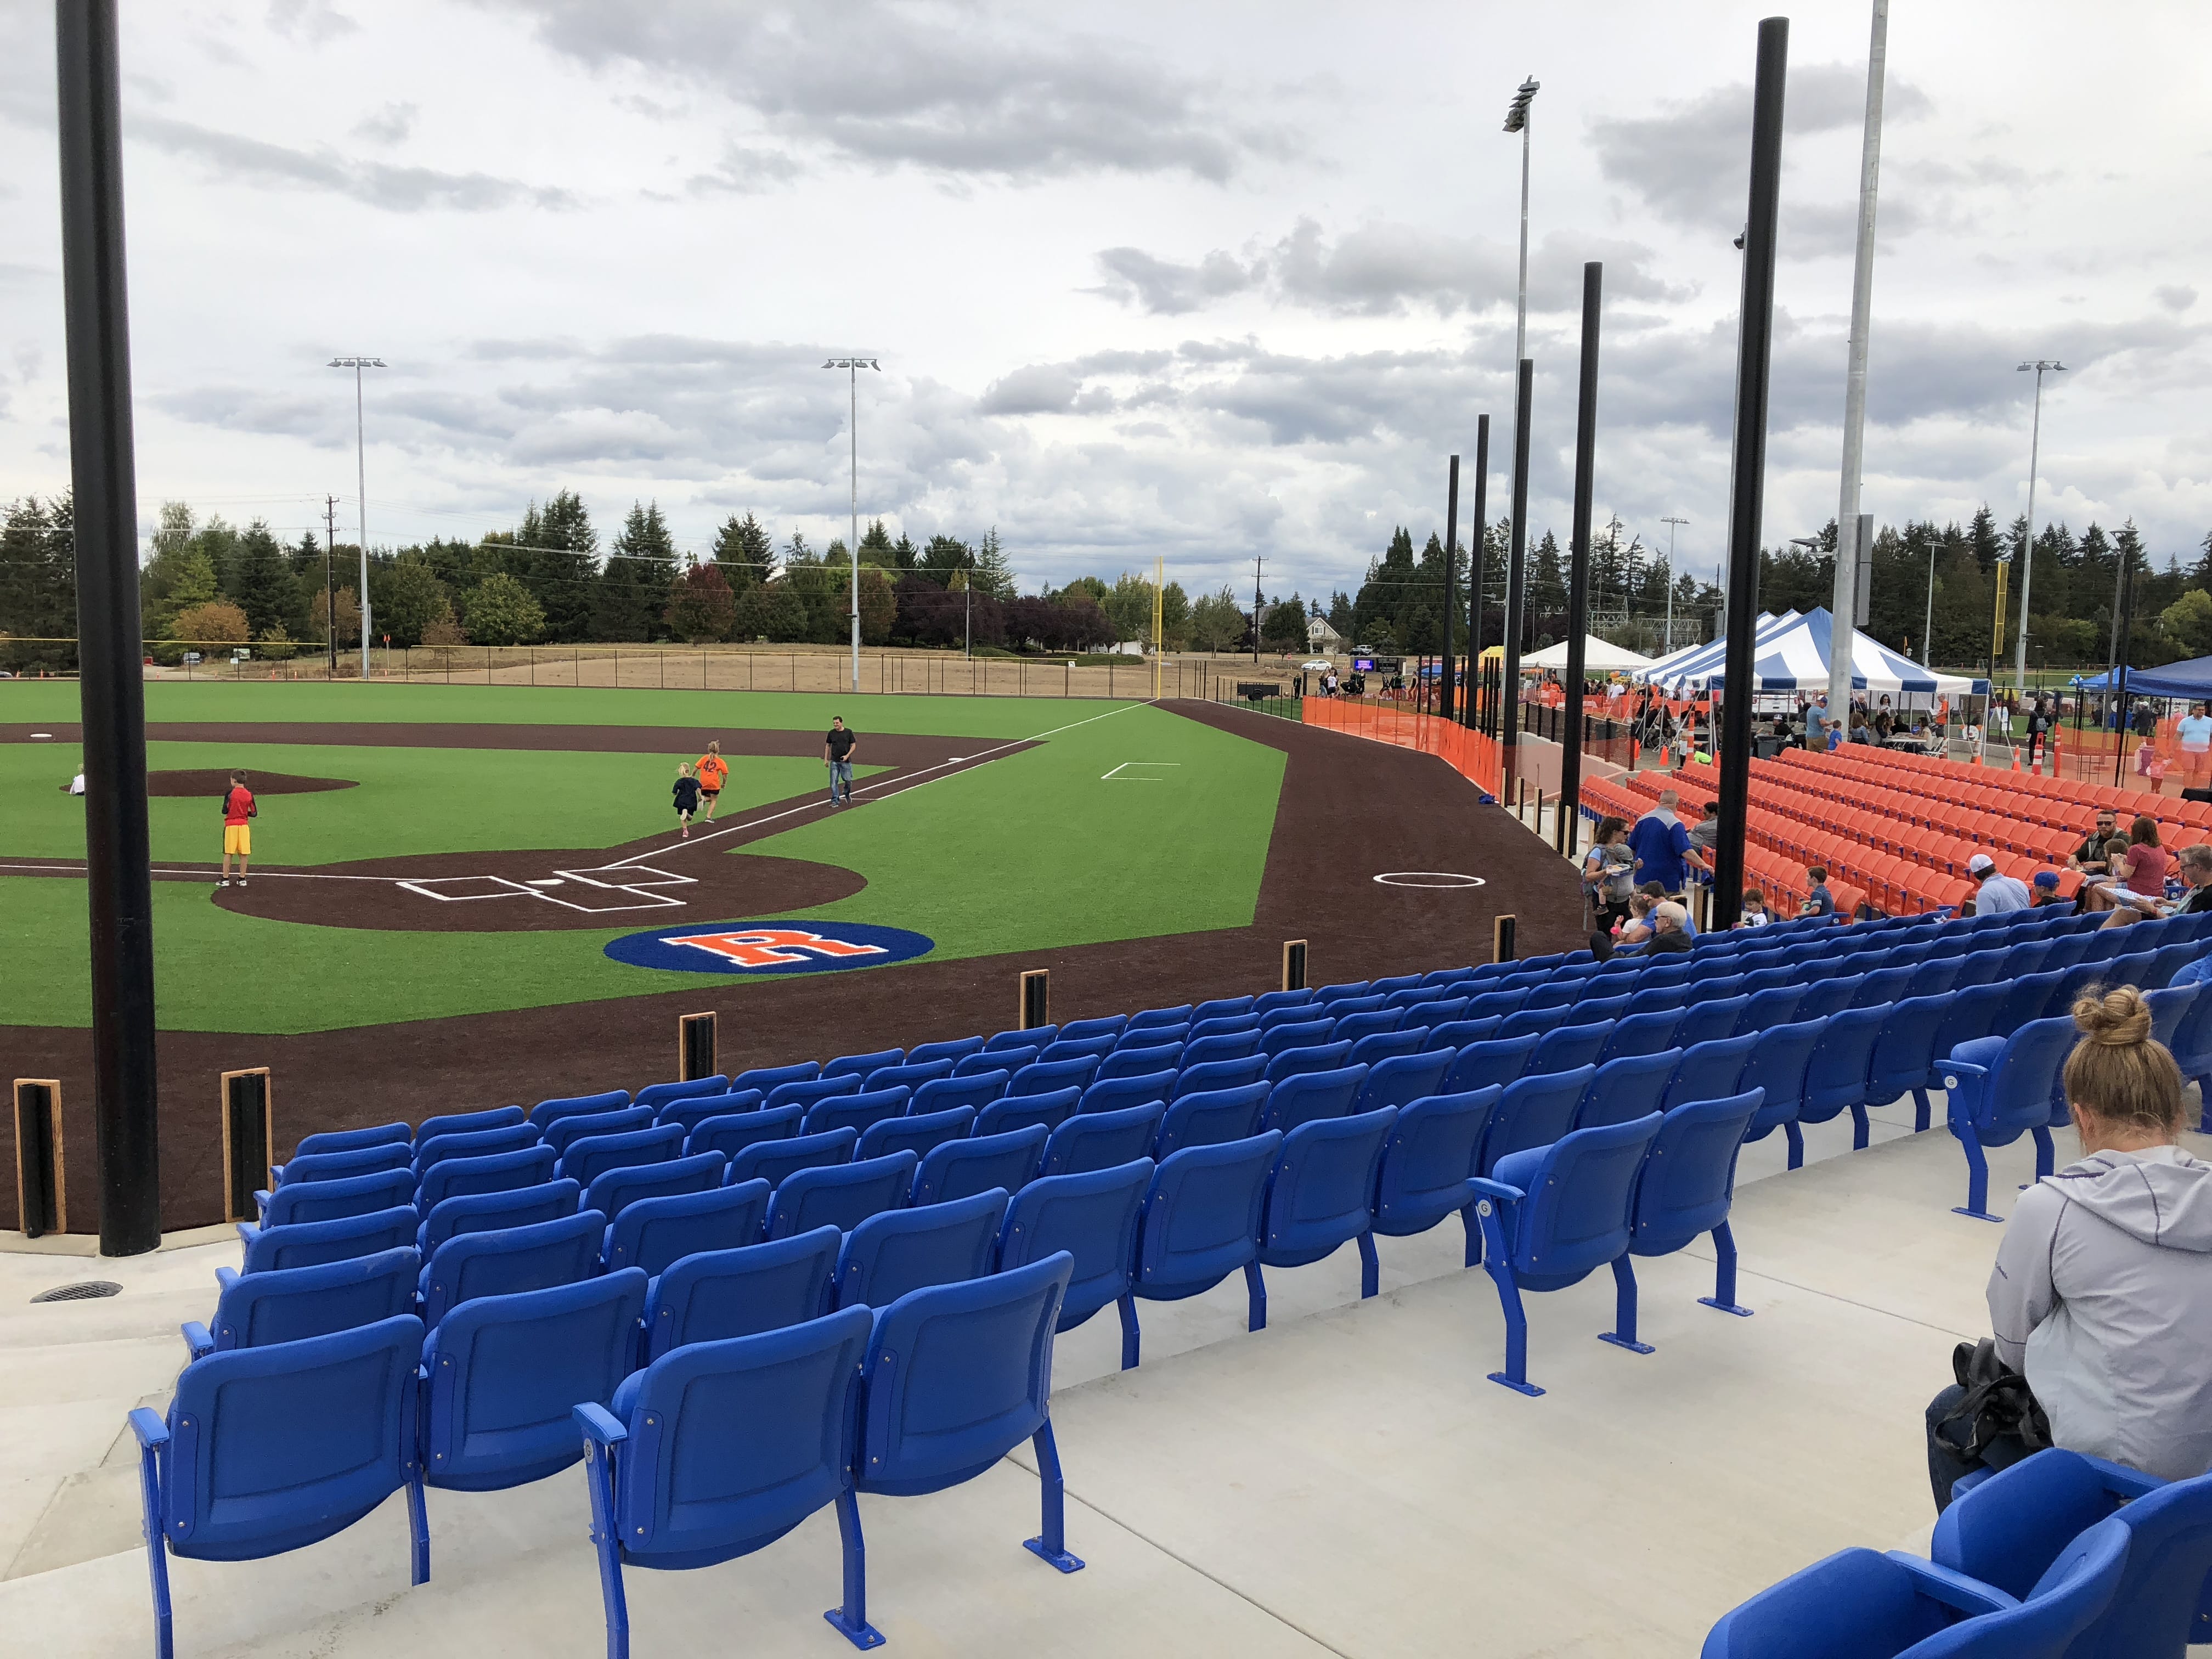 A view of the under-construction baseball field at the Ridgefield Outdoor Recreation Complex, where the Ridgefield Raptors will play next summer as part of the West Coast Baseball League (Micah Rice/The Columbian)